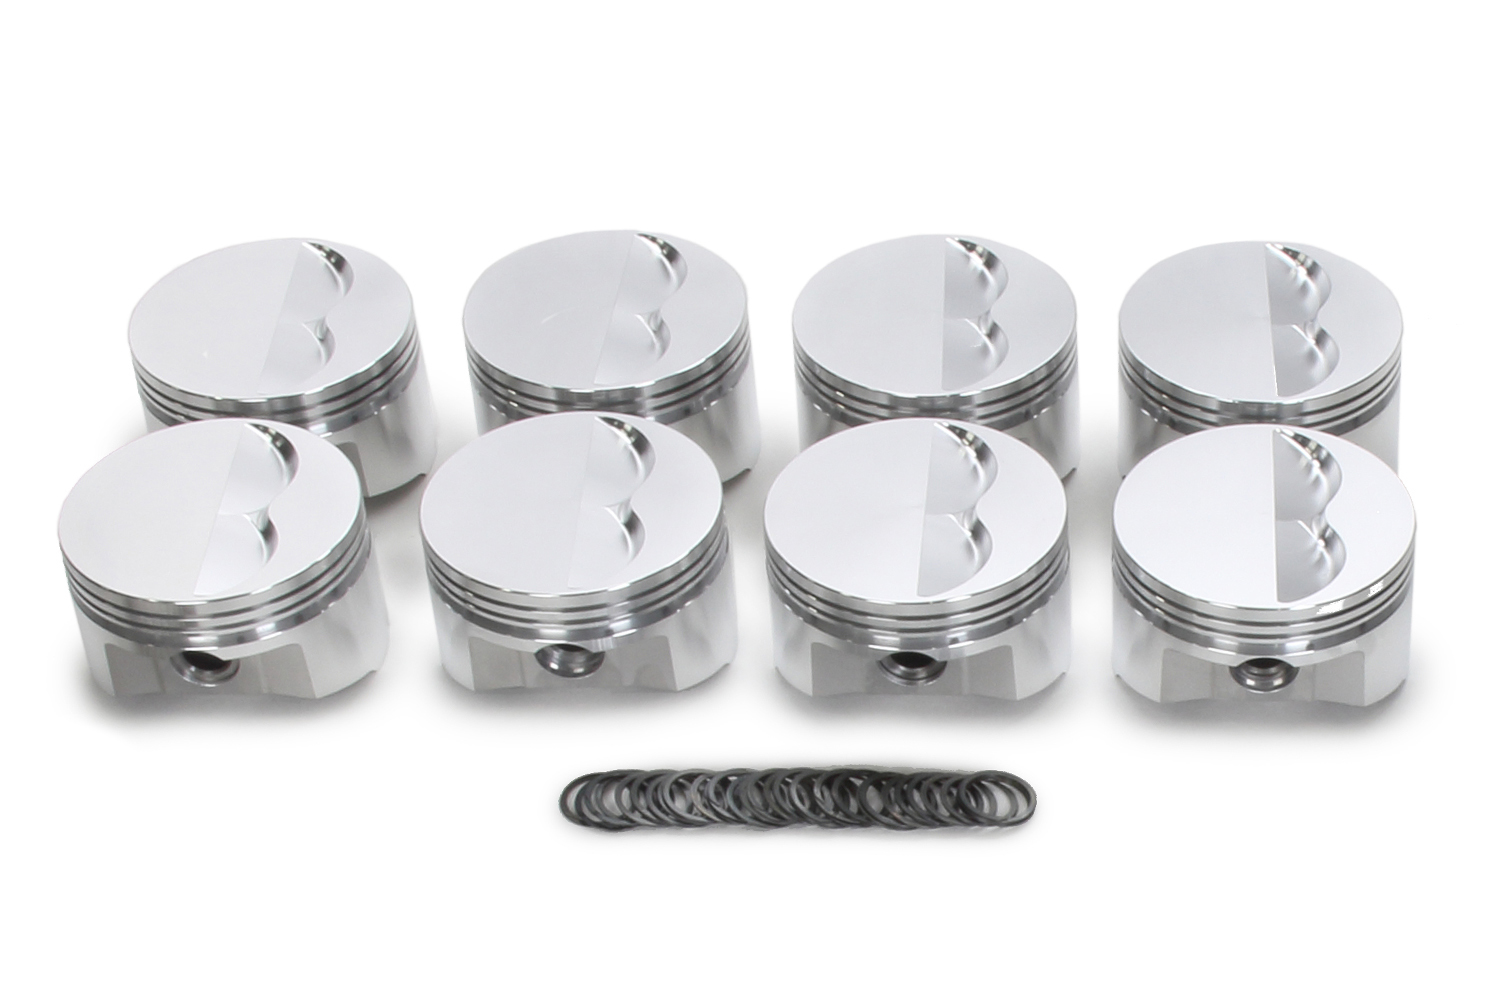 SRP Pistons 138094 Piston, 350 Flat Top, Forged, 4.040 in Bore, 1/16 x 1/16 x 3/16 in Ring Grooves, Minus 5.00 cc, Small Block Chevy, Set of 8